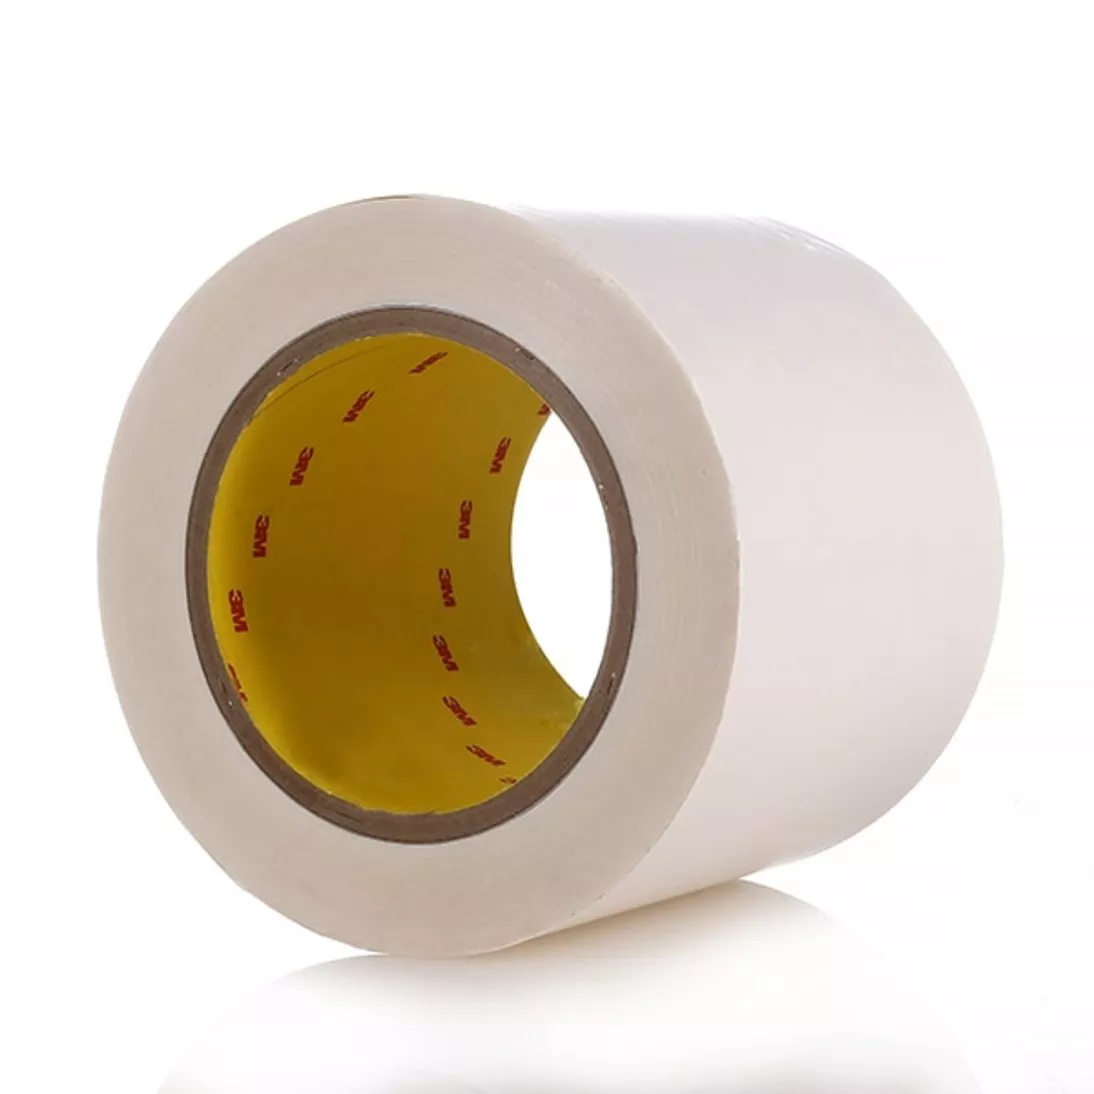 3M™ Double Coated Tape 9009, Clear, 54 in x 60 yd, 2.1 mil, 1 roll per
case